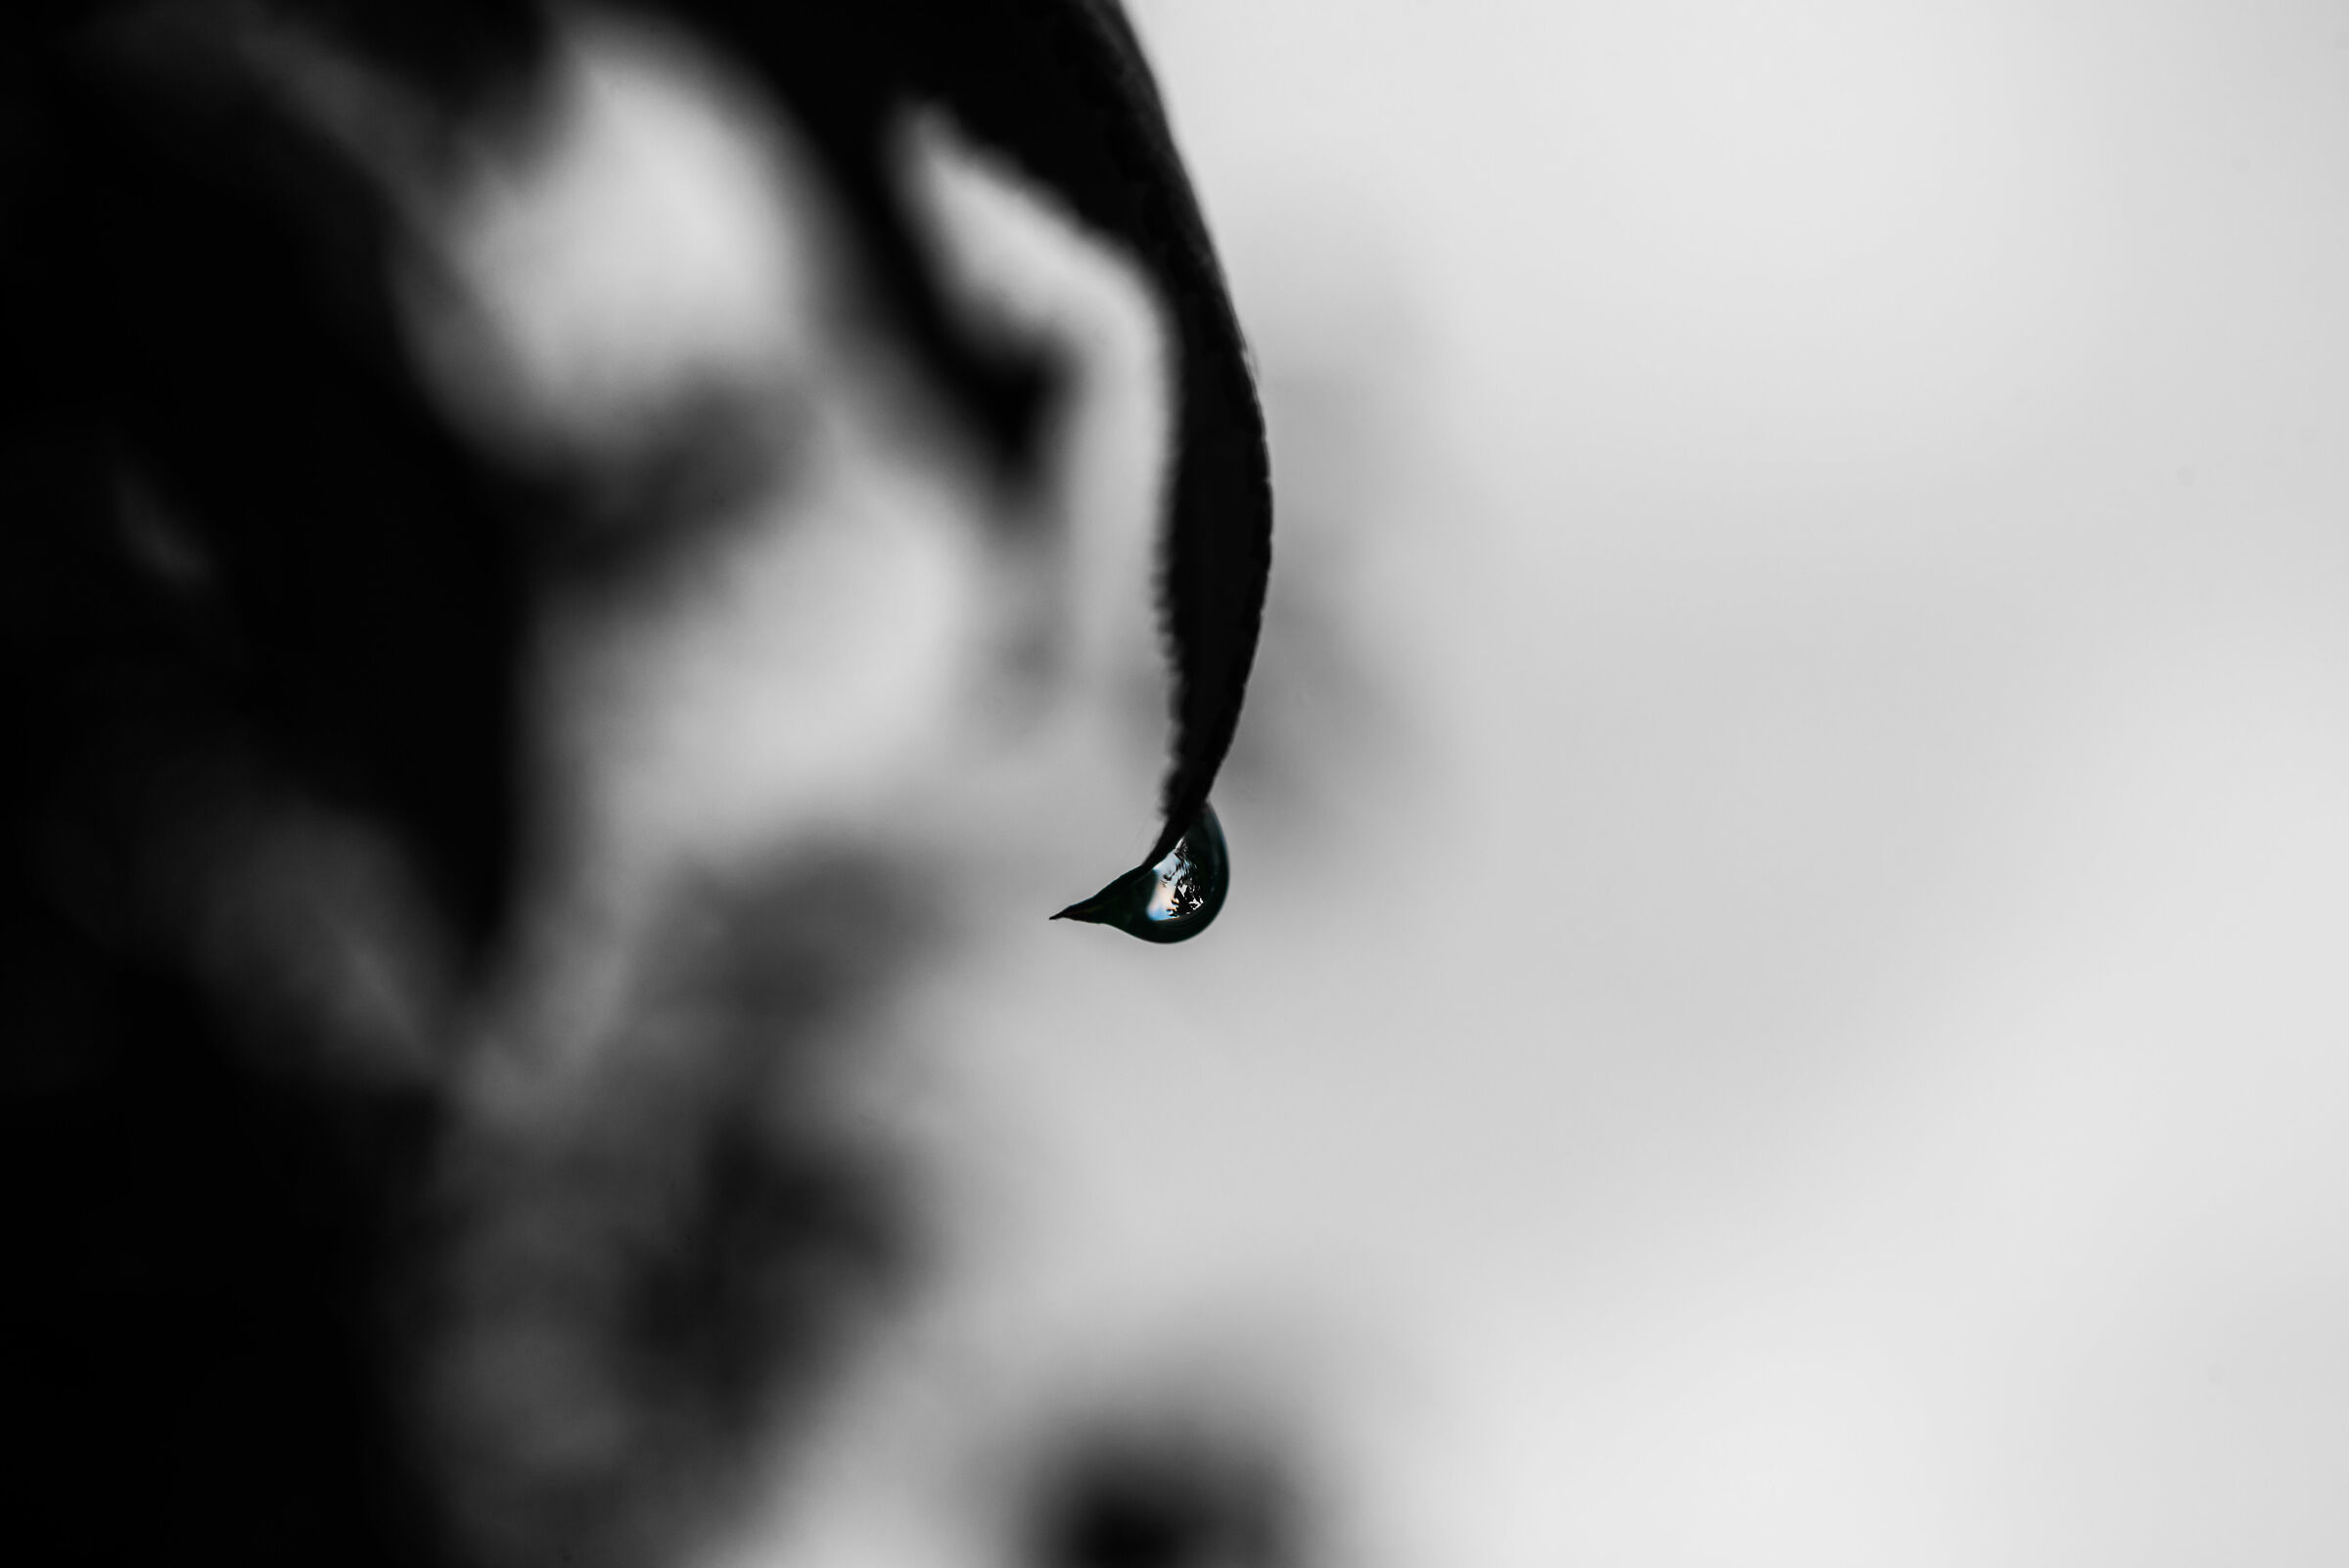 Your face in the drop......